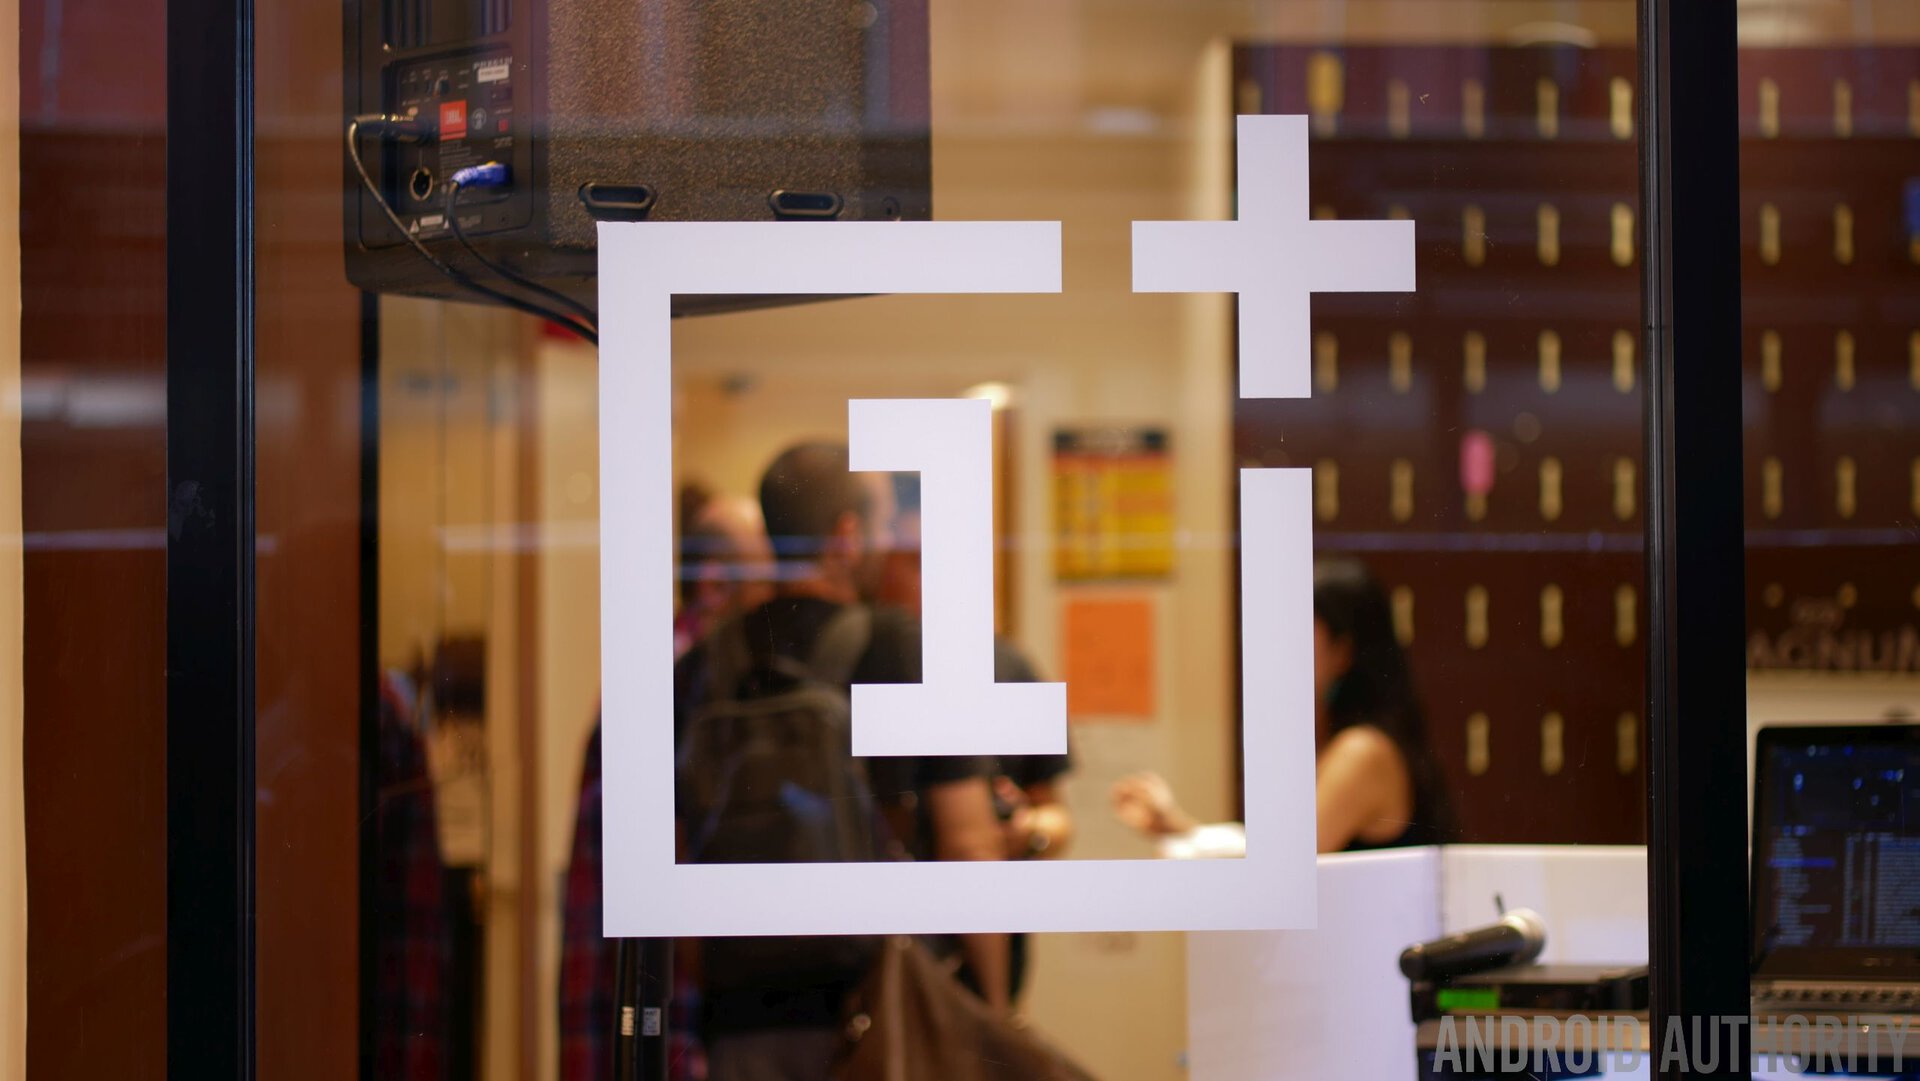 OnePlus 5 Pop-up event in NYC: Magnum, Lines, & More Android Authority